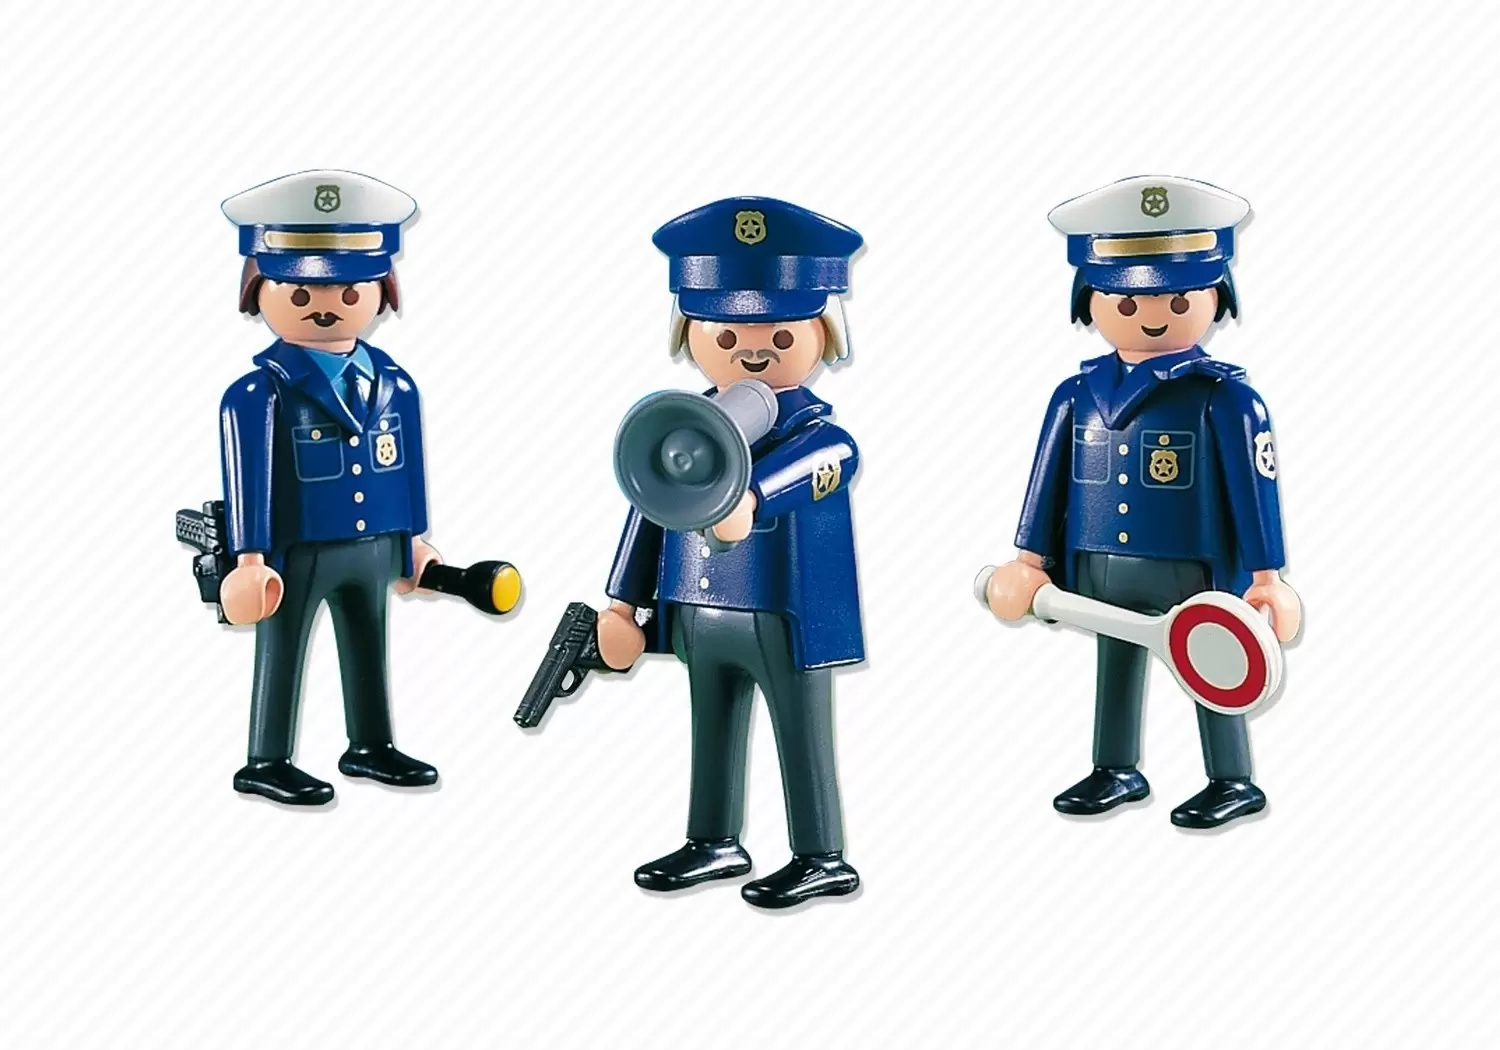 PLAYMOBIL FIGURE POLICE OFFICER POLICE OFFICERS TRAFFIC COMMISSION